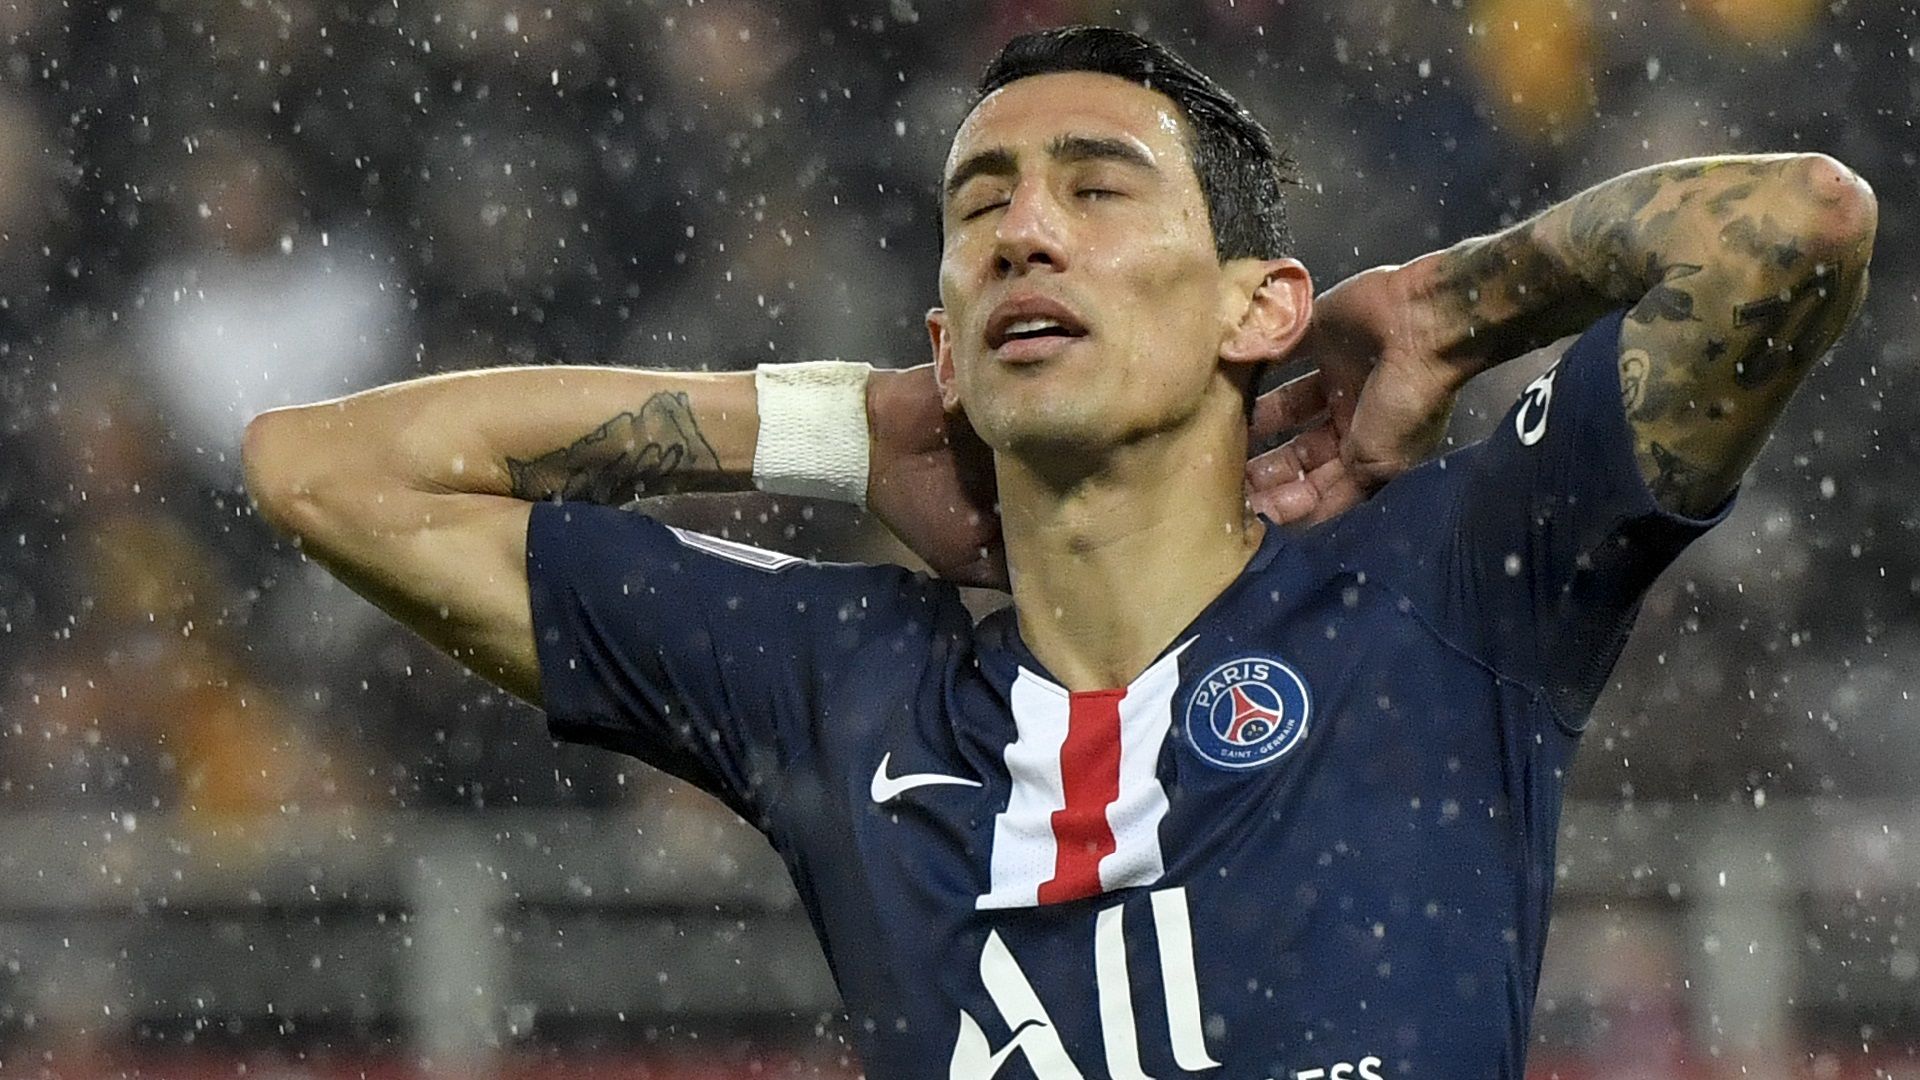 PSG Star Di Maria Handed Four Match Ban For Spitting Incident During Ligue 1 Loss To Marseille